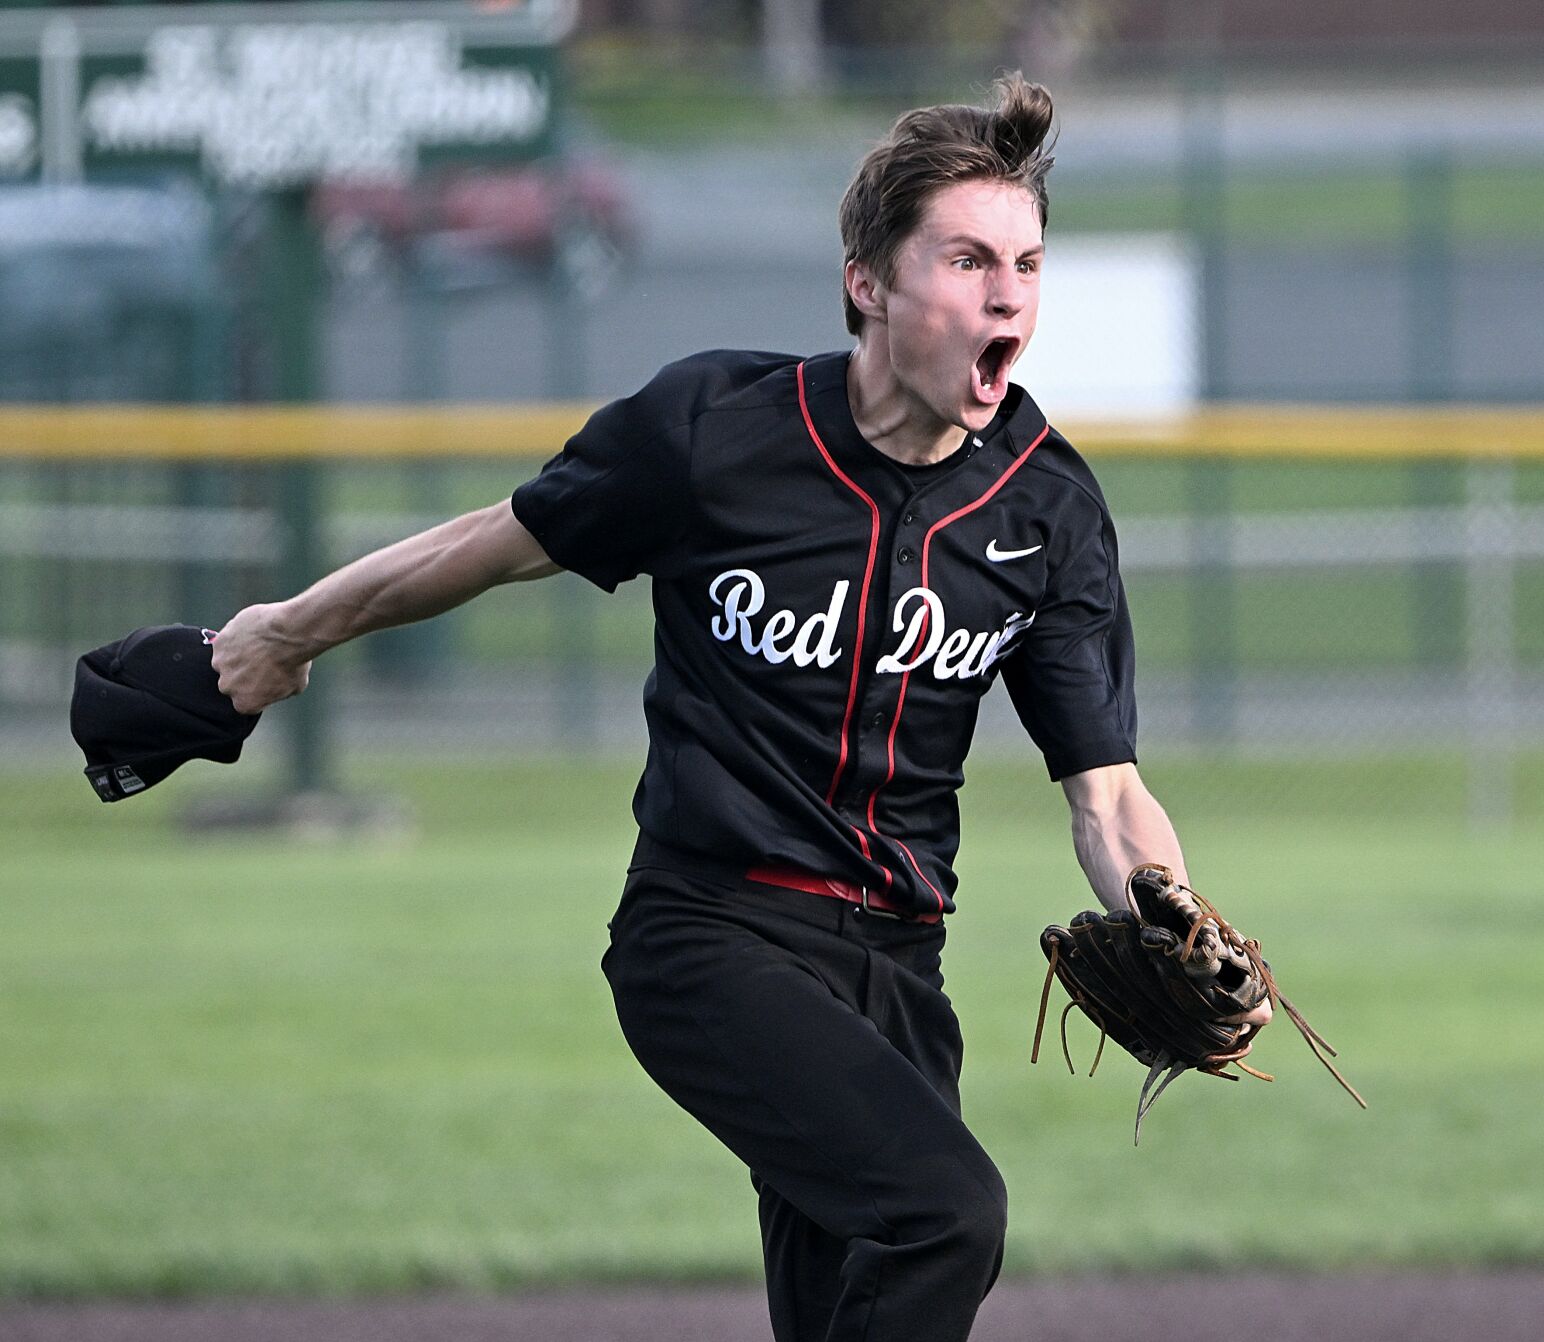 Central Cambria Makes History by Defeating Forest Hills in District 6-3A Semis with 7-3 Score